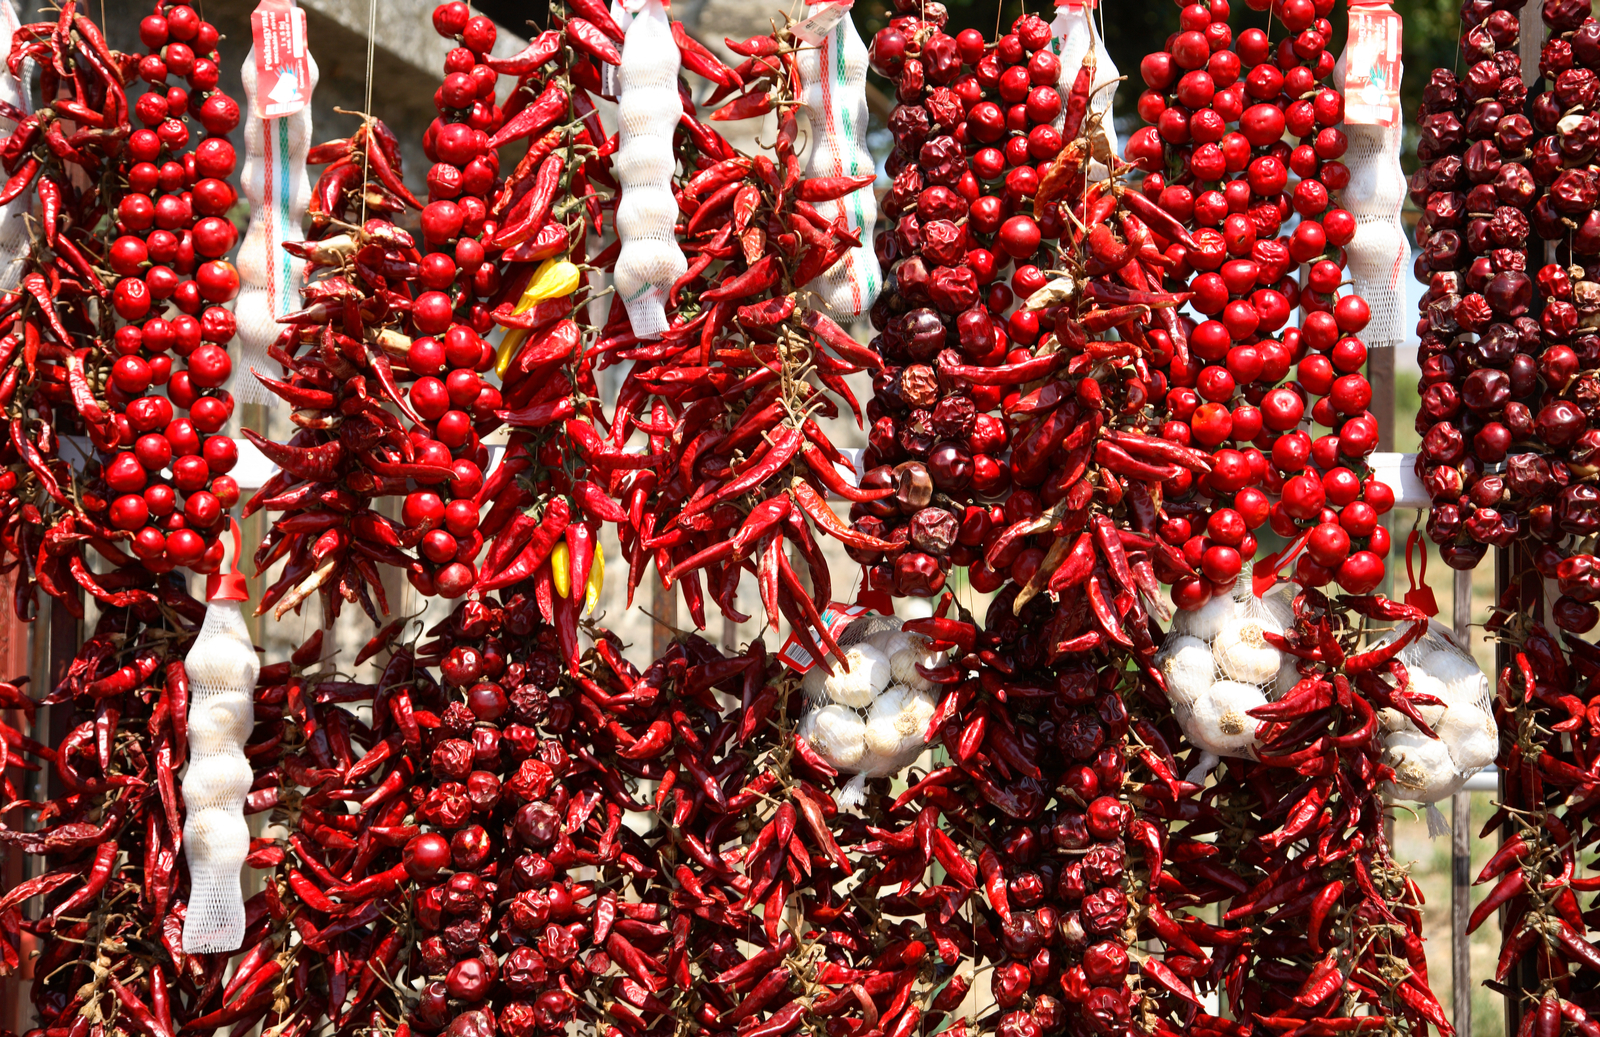 Some of the hot chillies at the markets on the Lower Danube